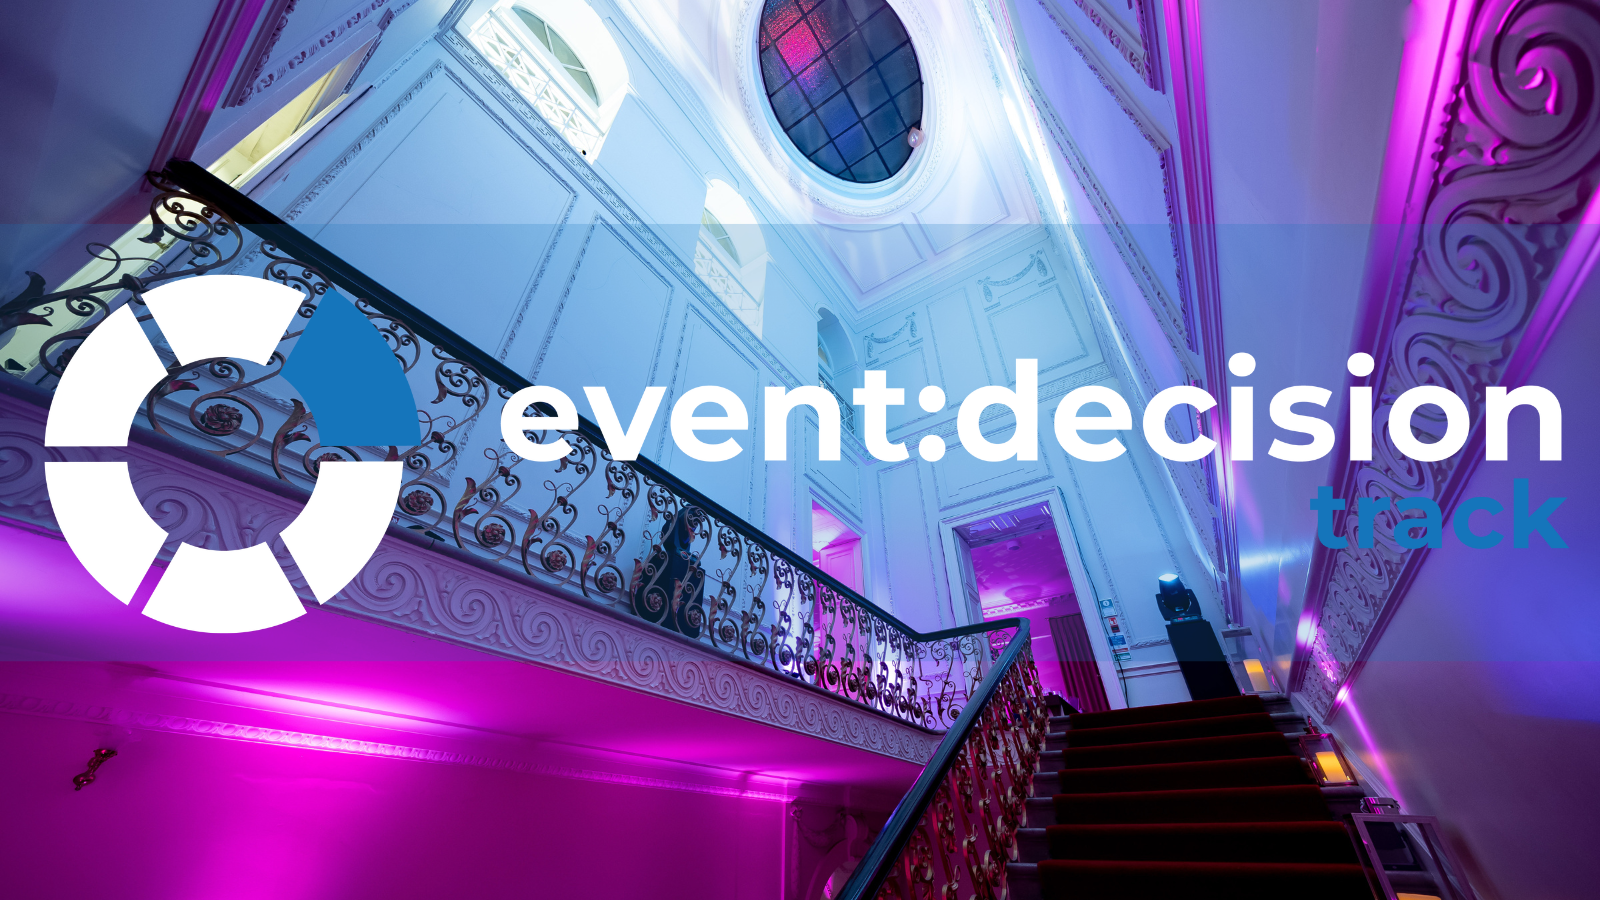 Kent House Knightsbridge partner with eventdecision reducing carbon footprint of events